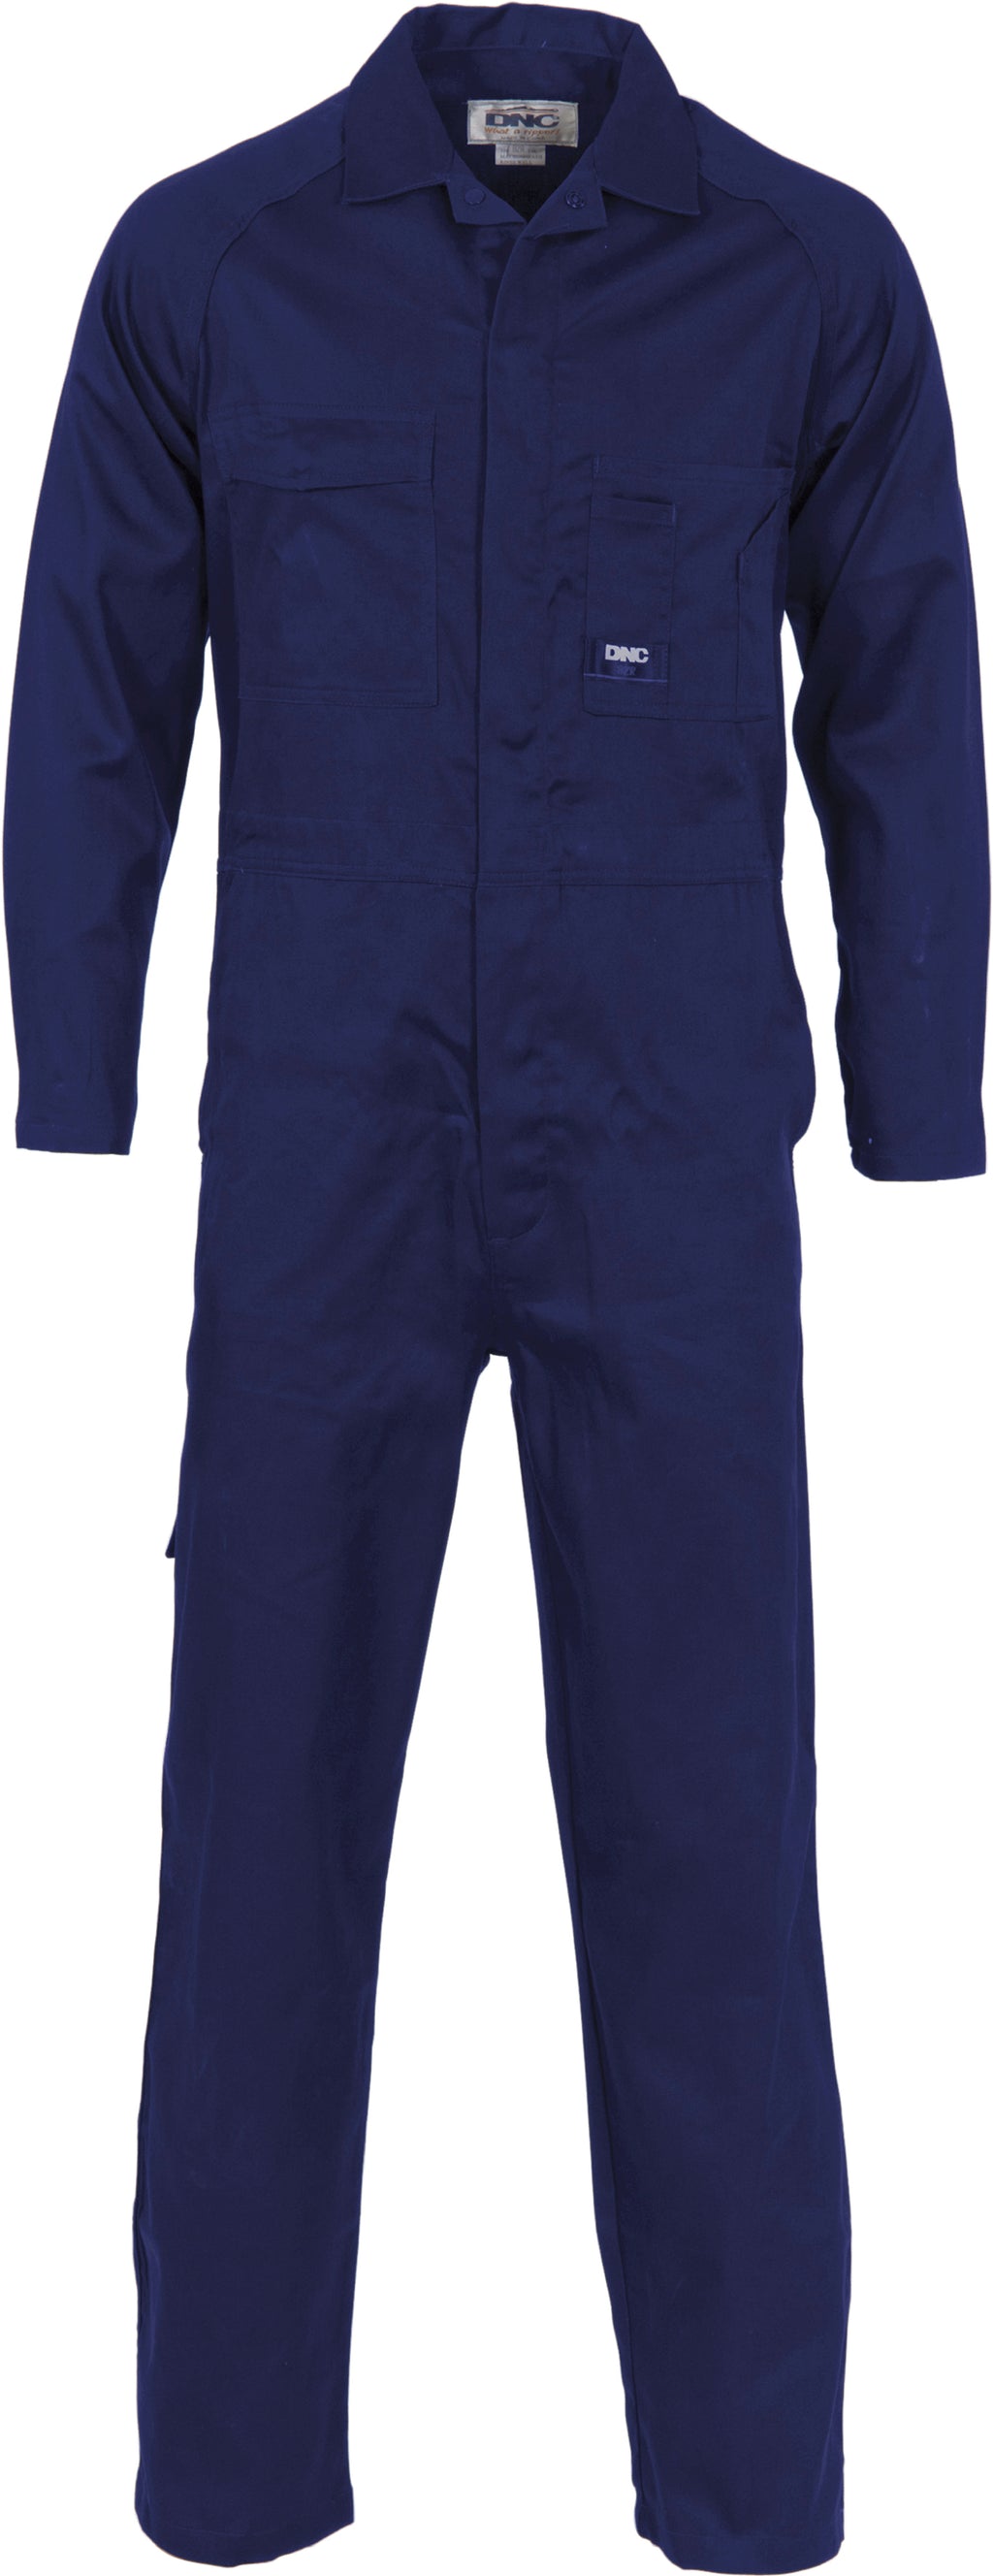 3104 - Lightweight Cool-Breeze Cotton Drill Coverall